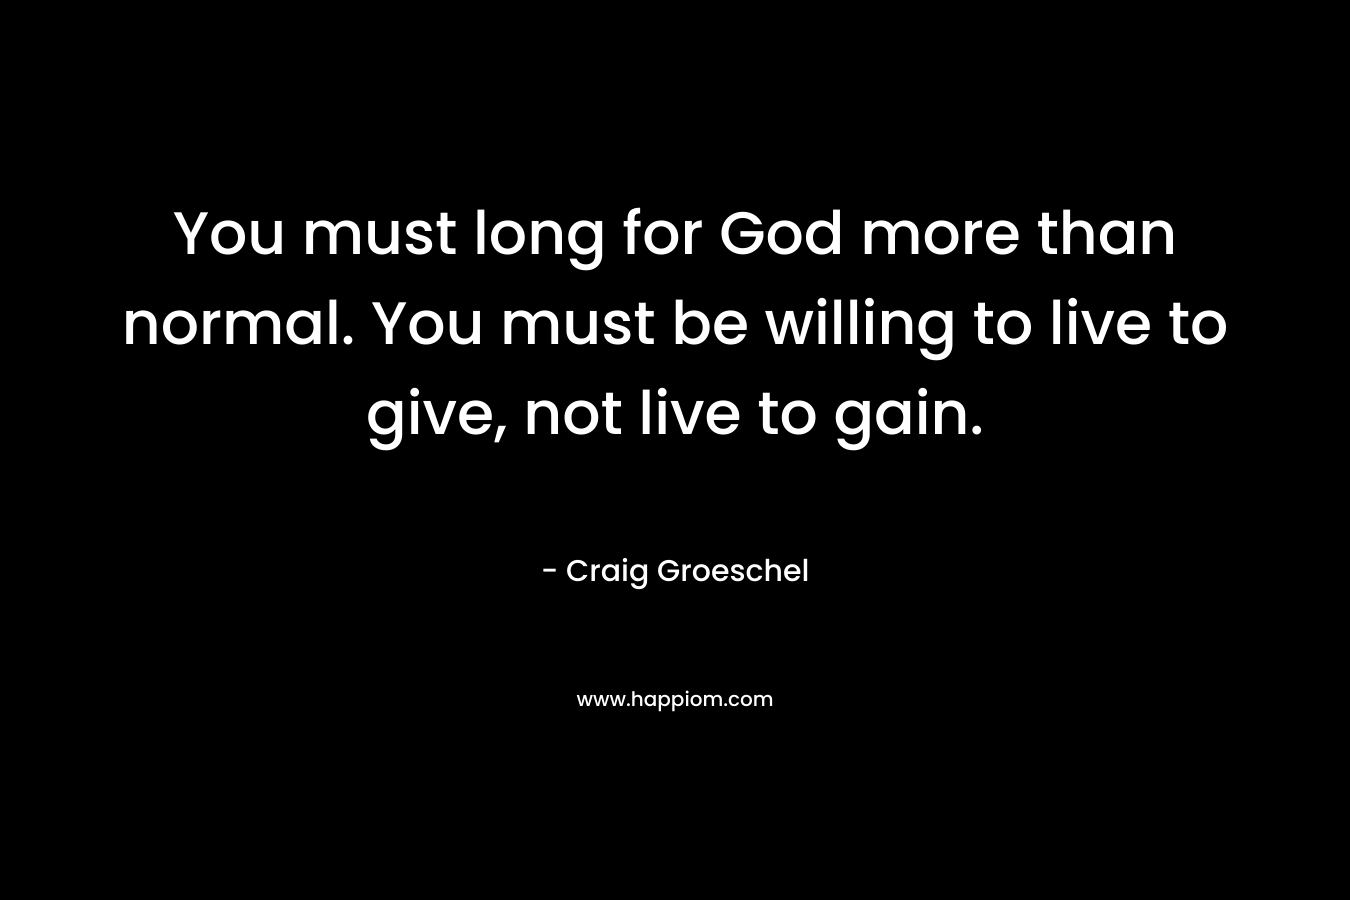 You must long for God more than normal. You must be willing to live to give, not live to gain.